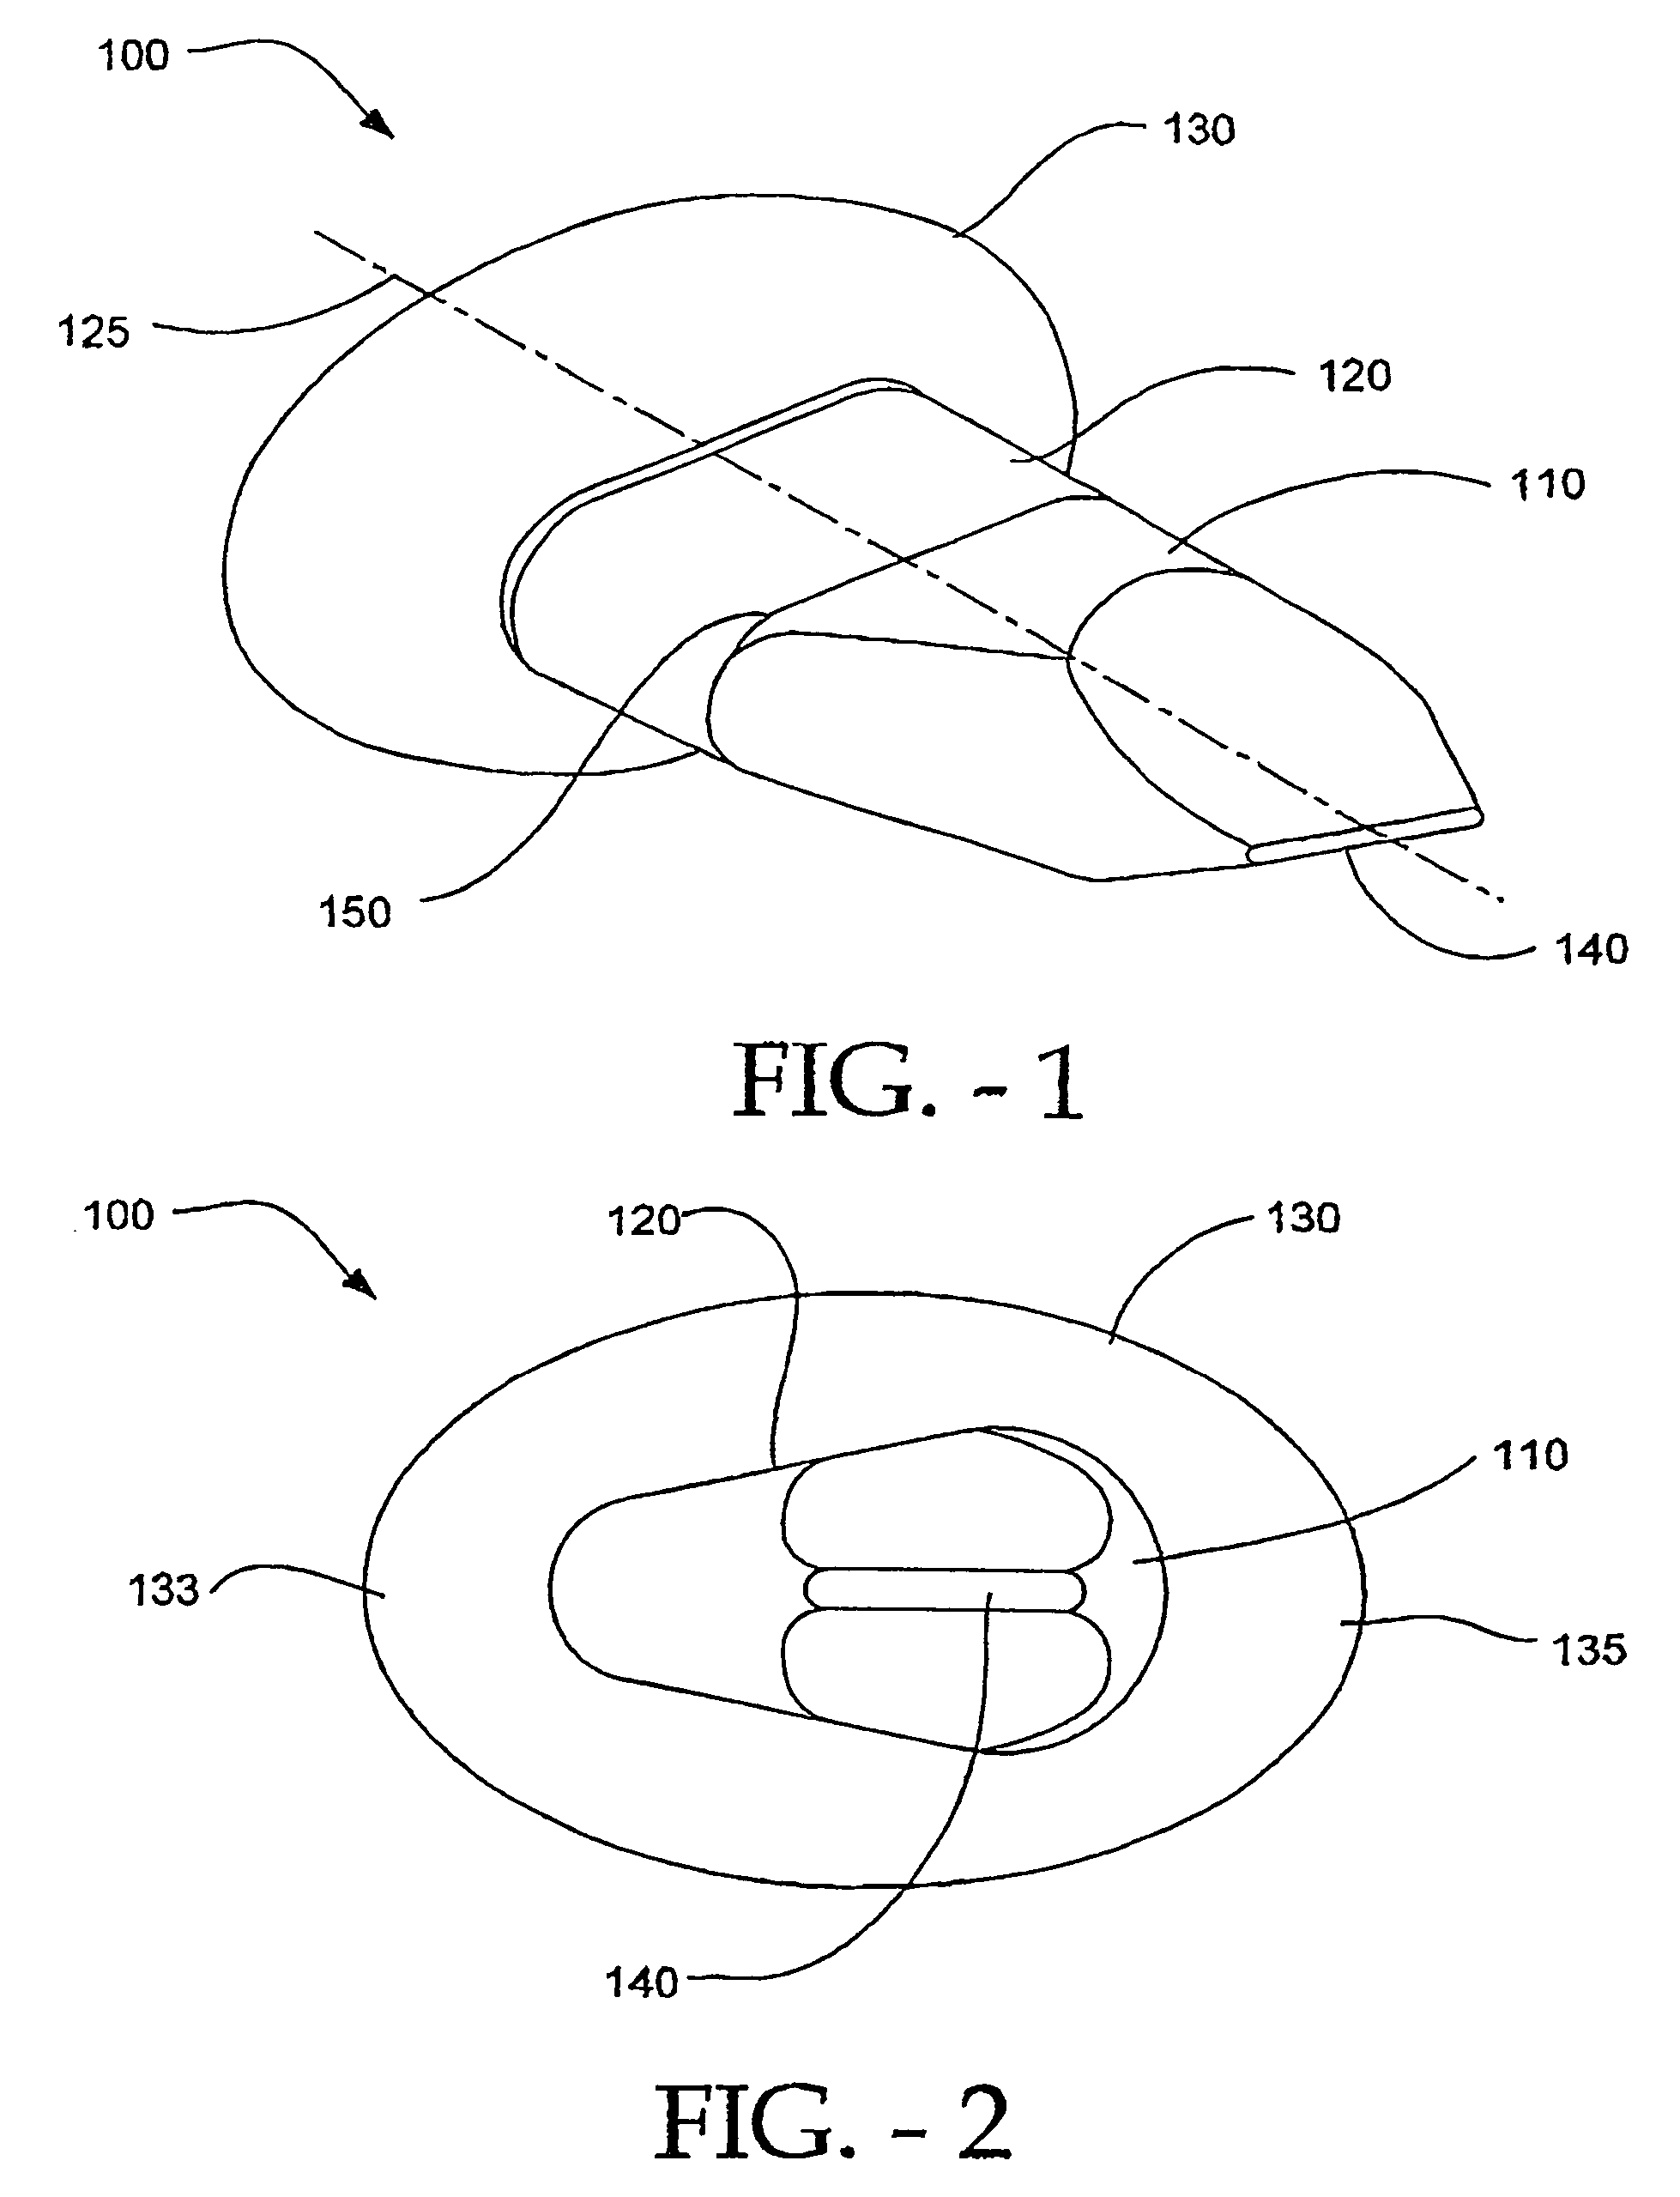 Interspinous process distraction implant and method of implantation